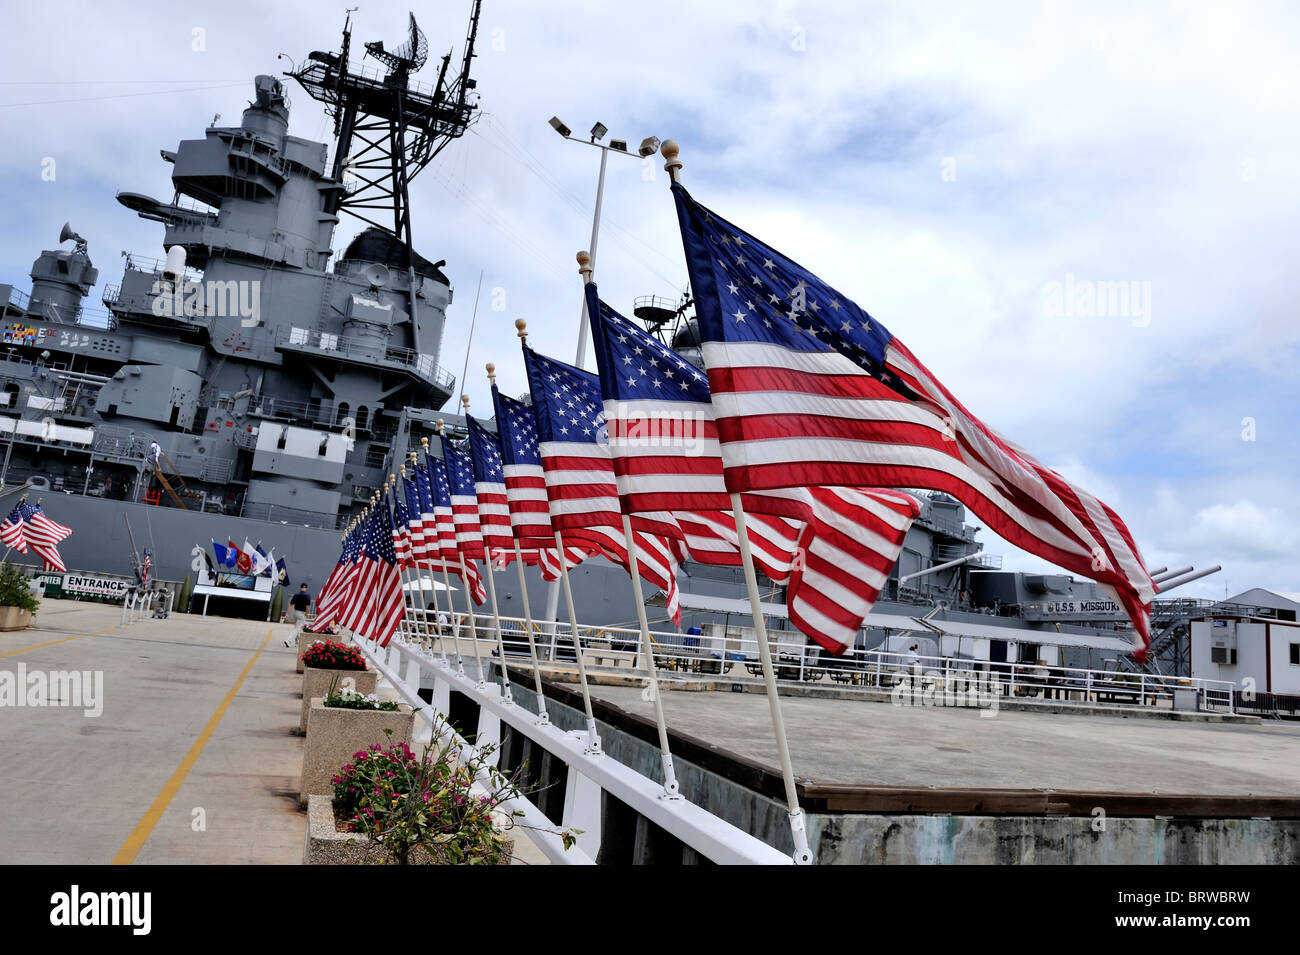 Approach to the USS Missouri, lined with USA flags. Battleship Missouri Memorial, Pearl Harbour, Hawaii Stock Photo